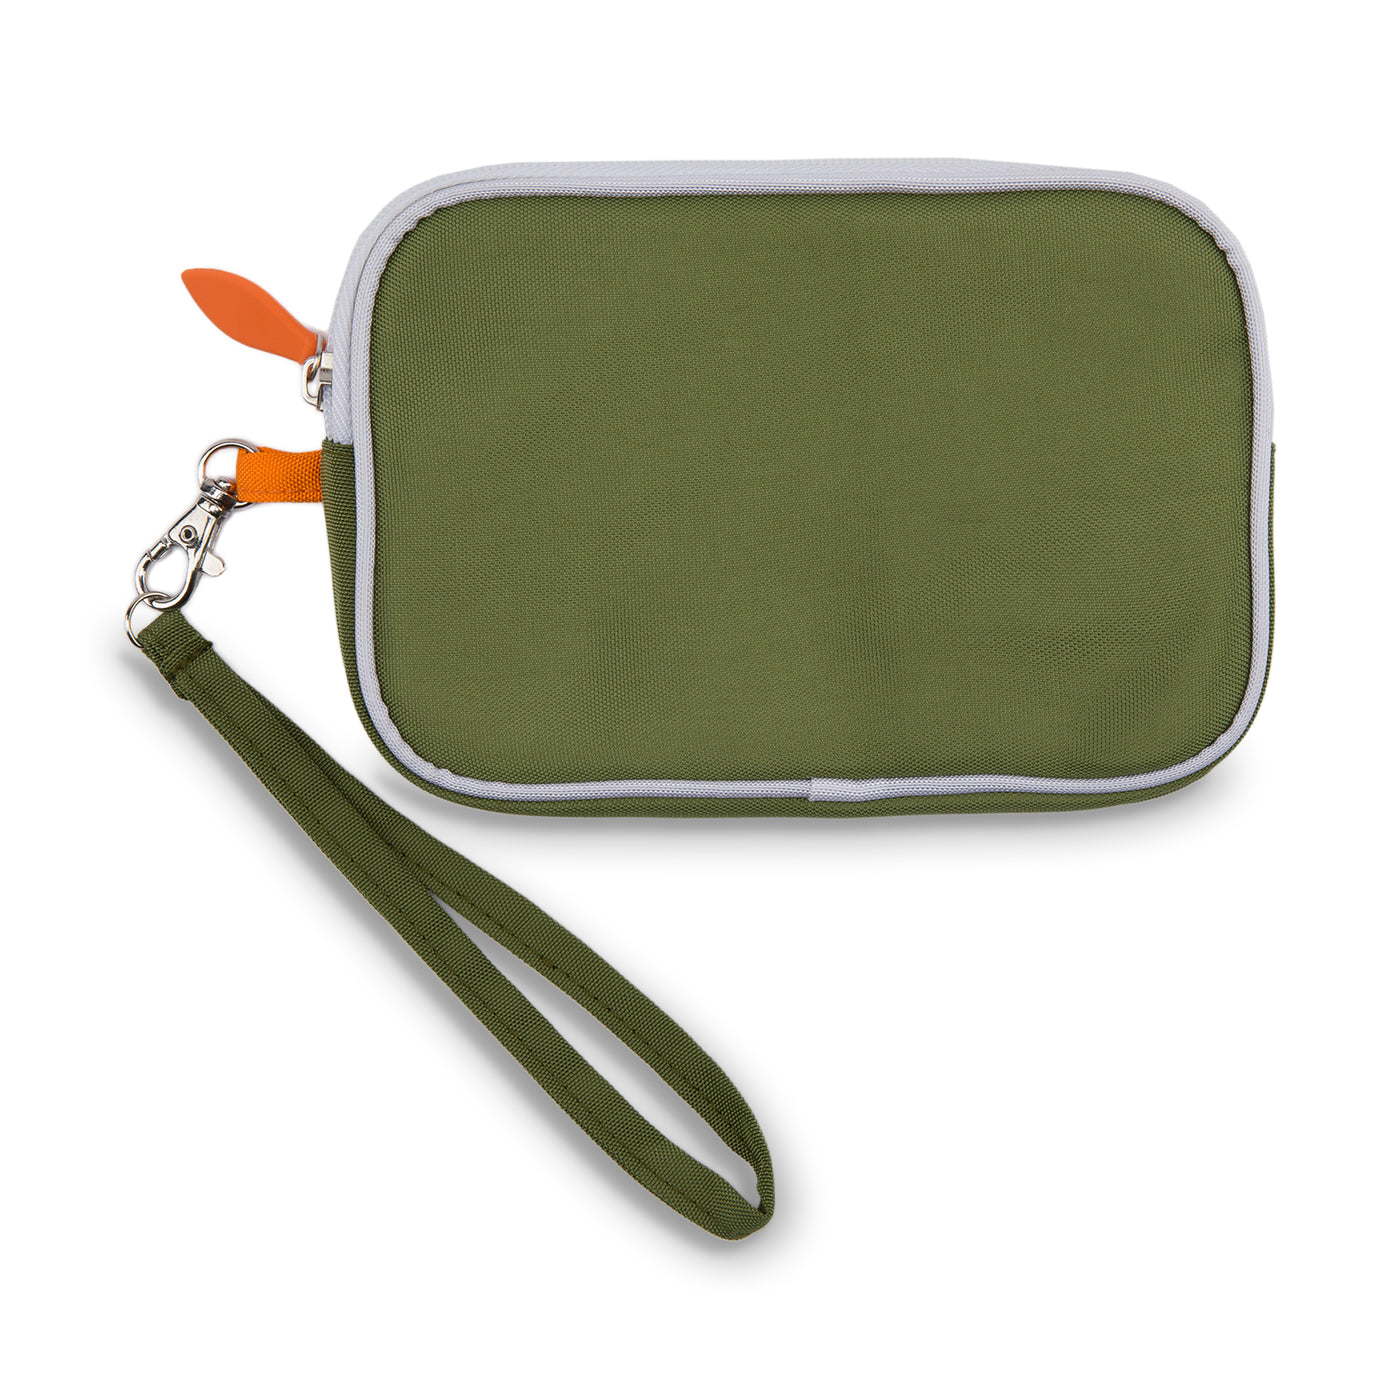 army green color rectangular wristlet with orange zippers and white trim